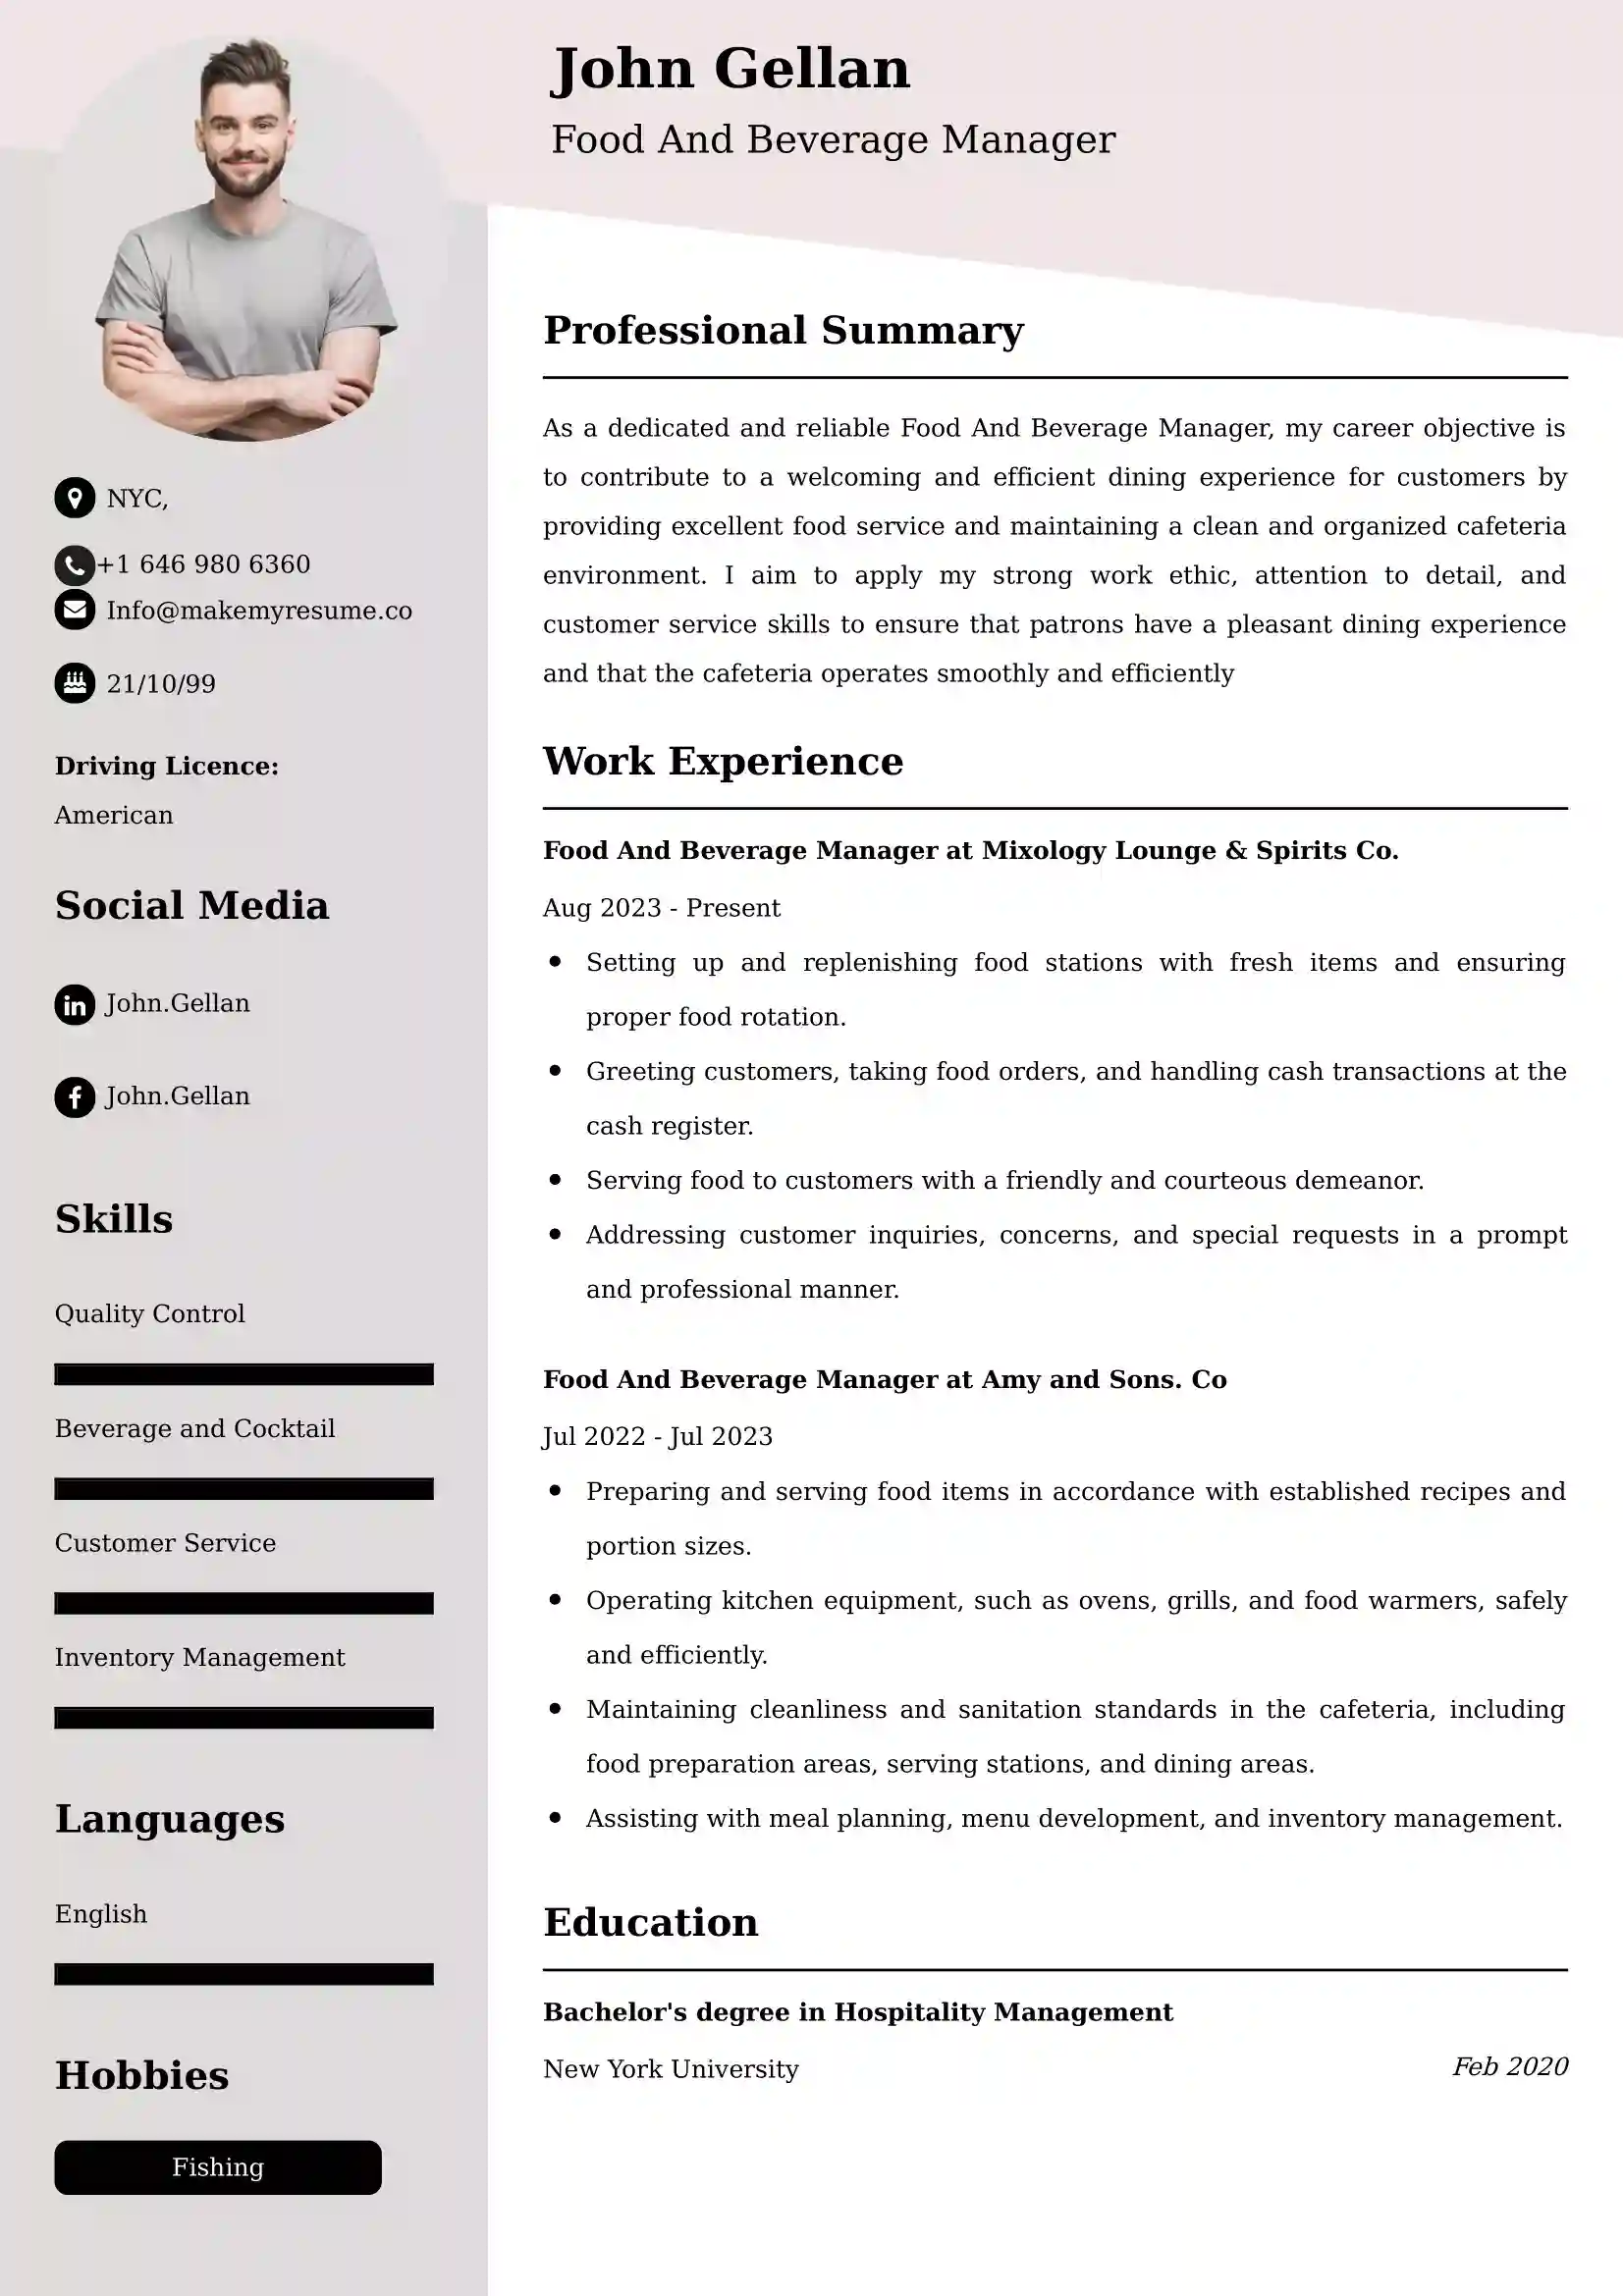 Food And Beverage Manager CV Examples Malaysia